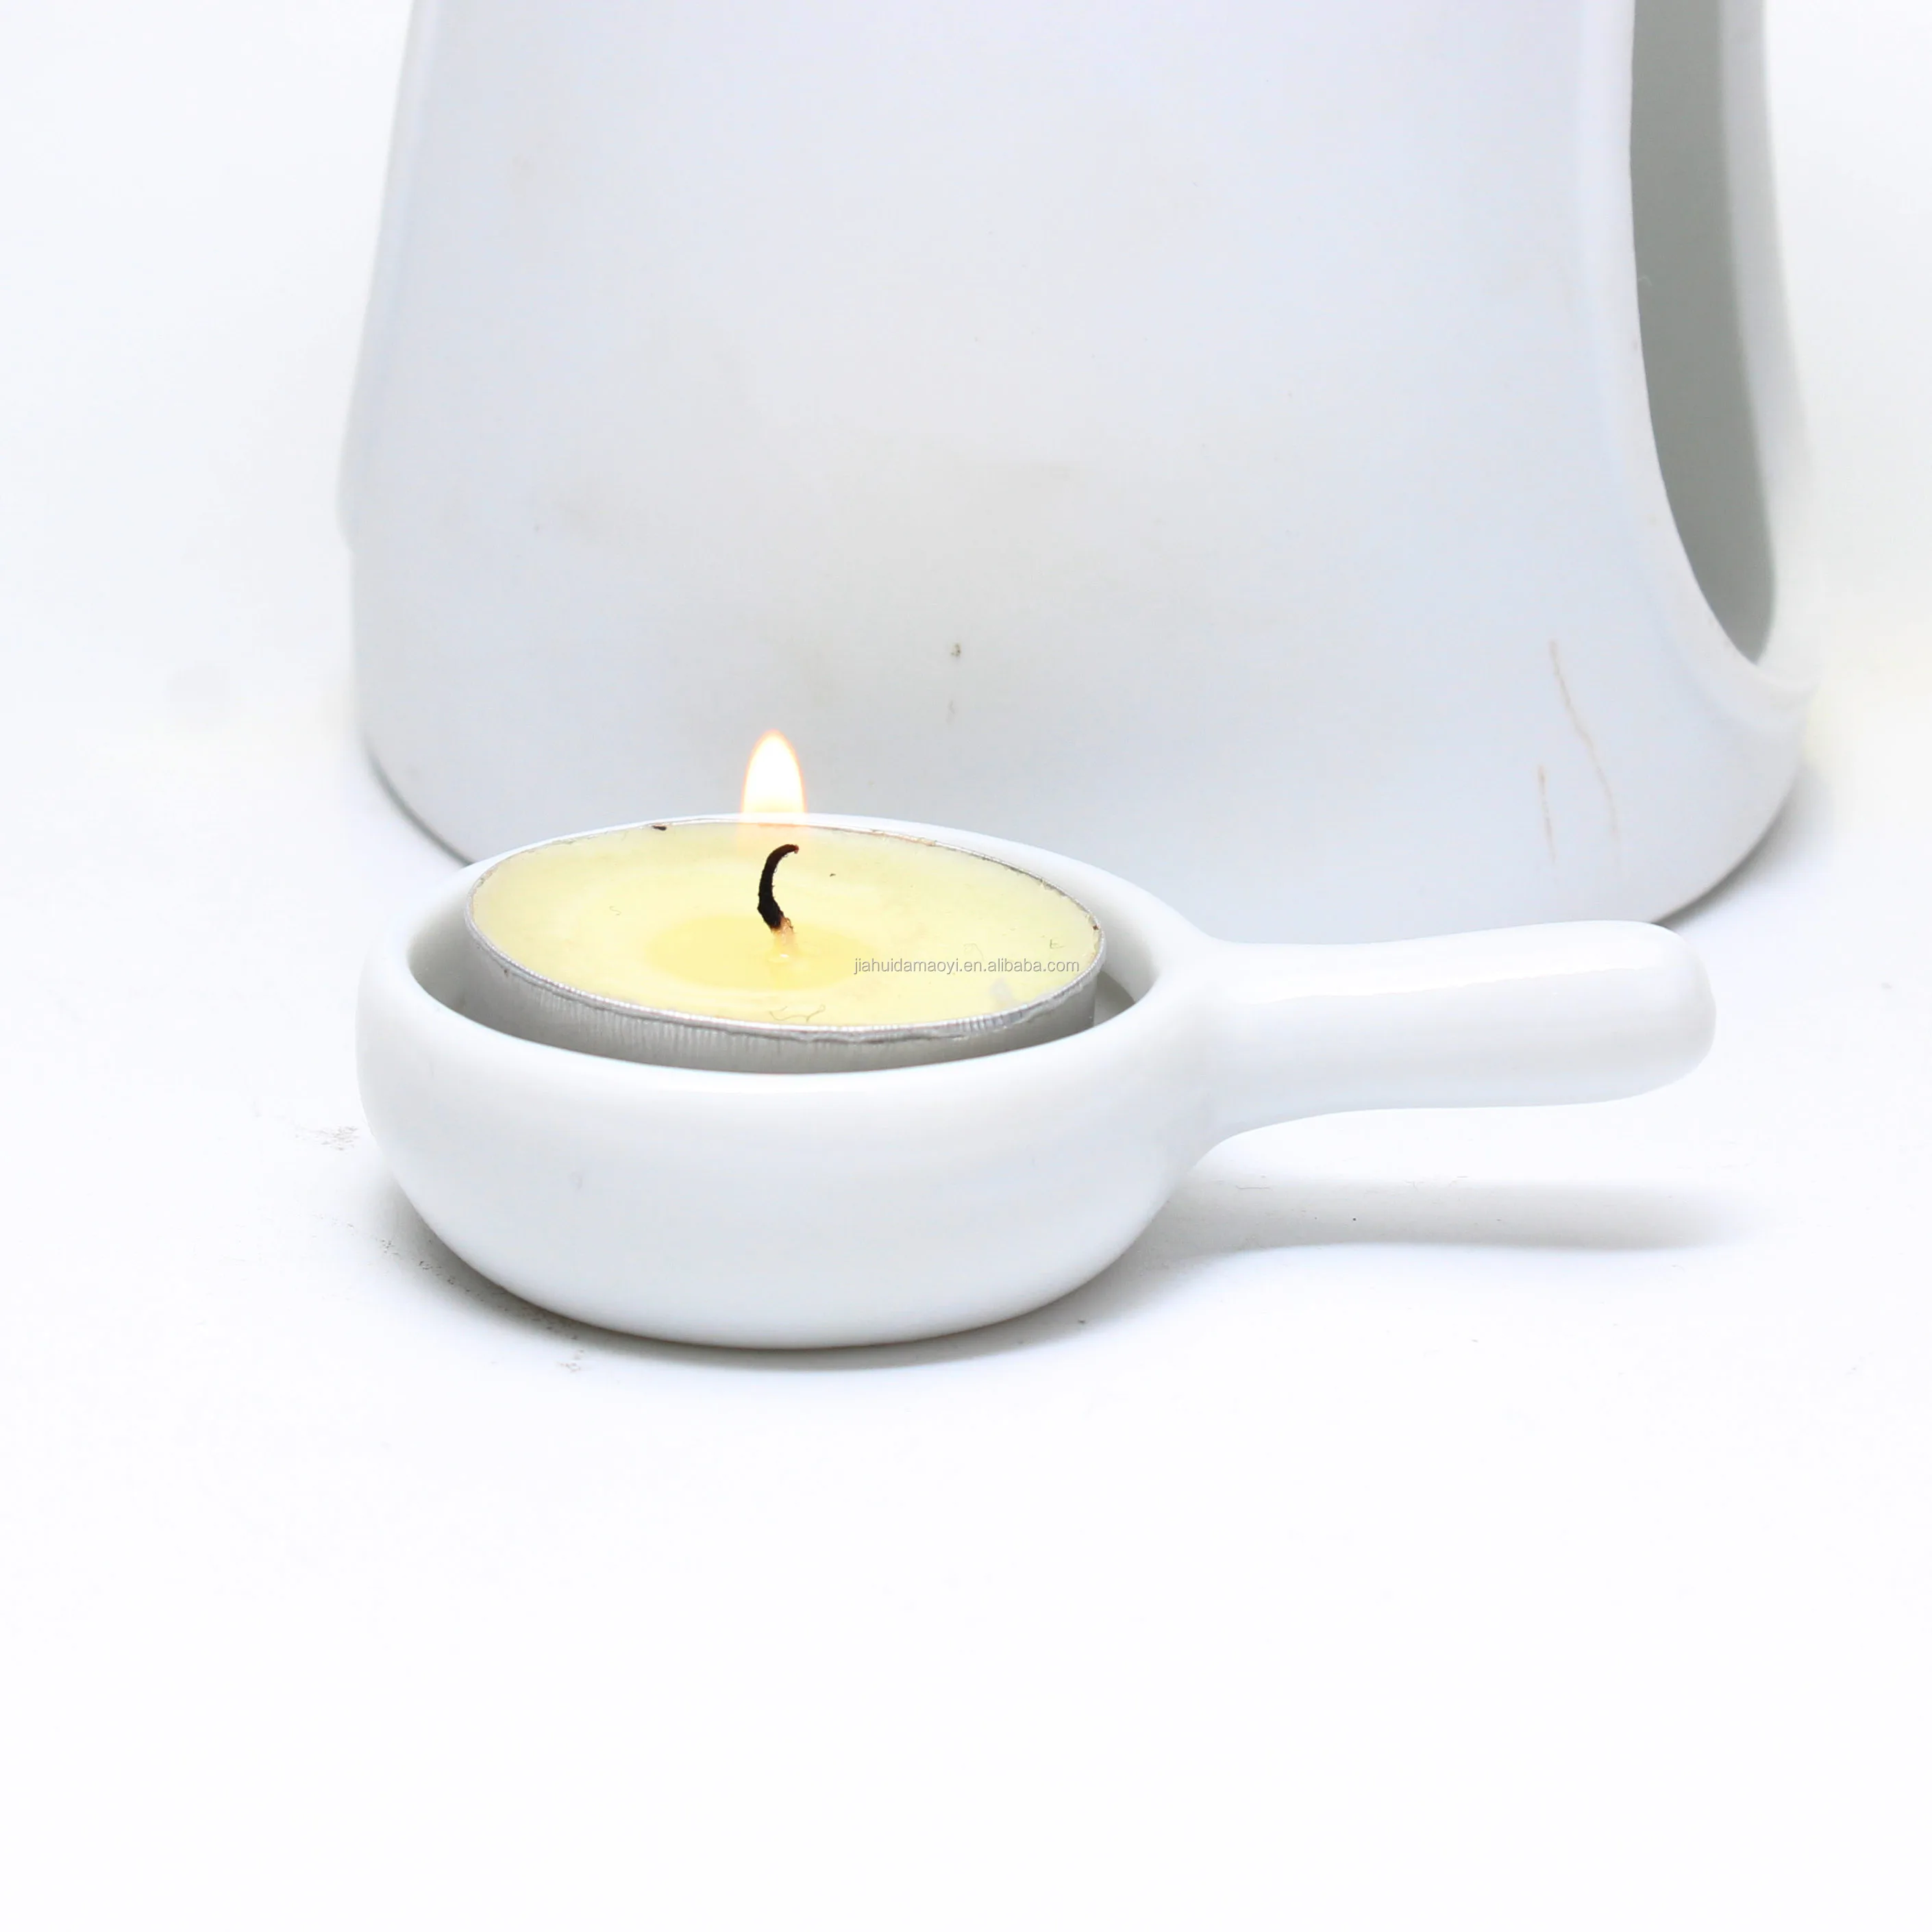 High Oil Burner Candle Spoon Aromatherapy Wax Melt Burners Oil Diffuser Tealight Spoon Holder